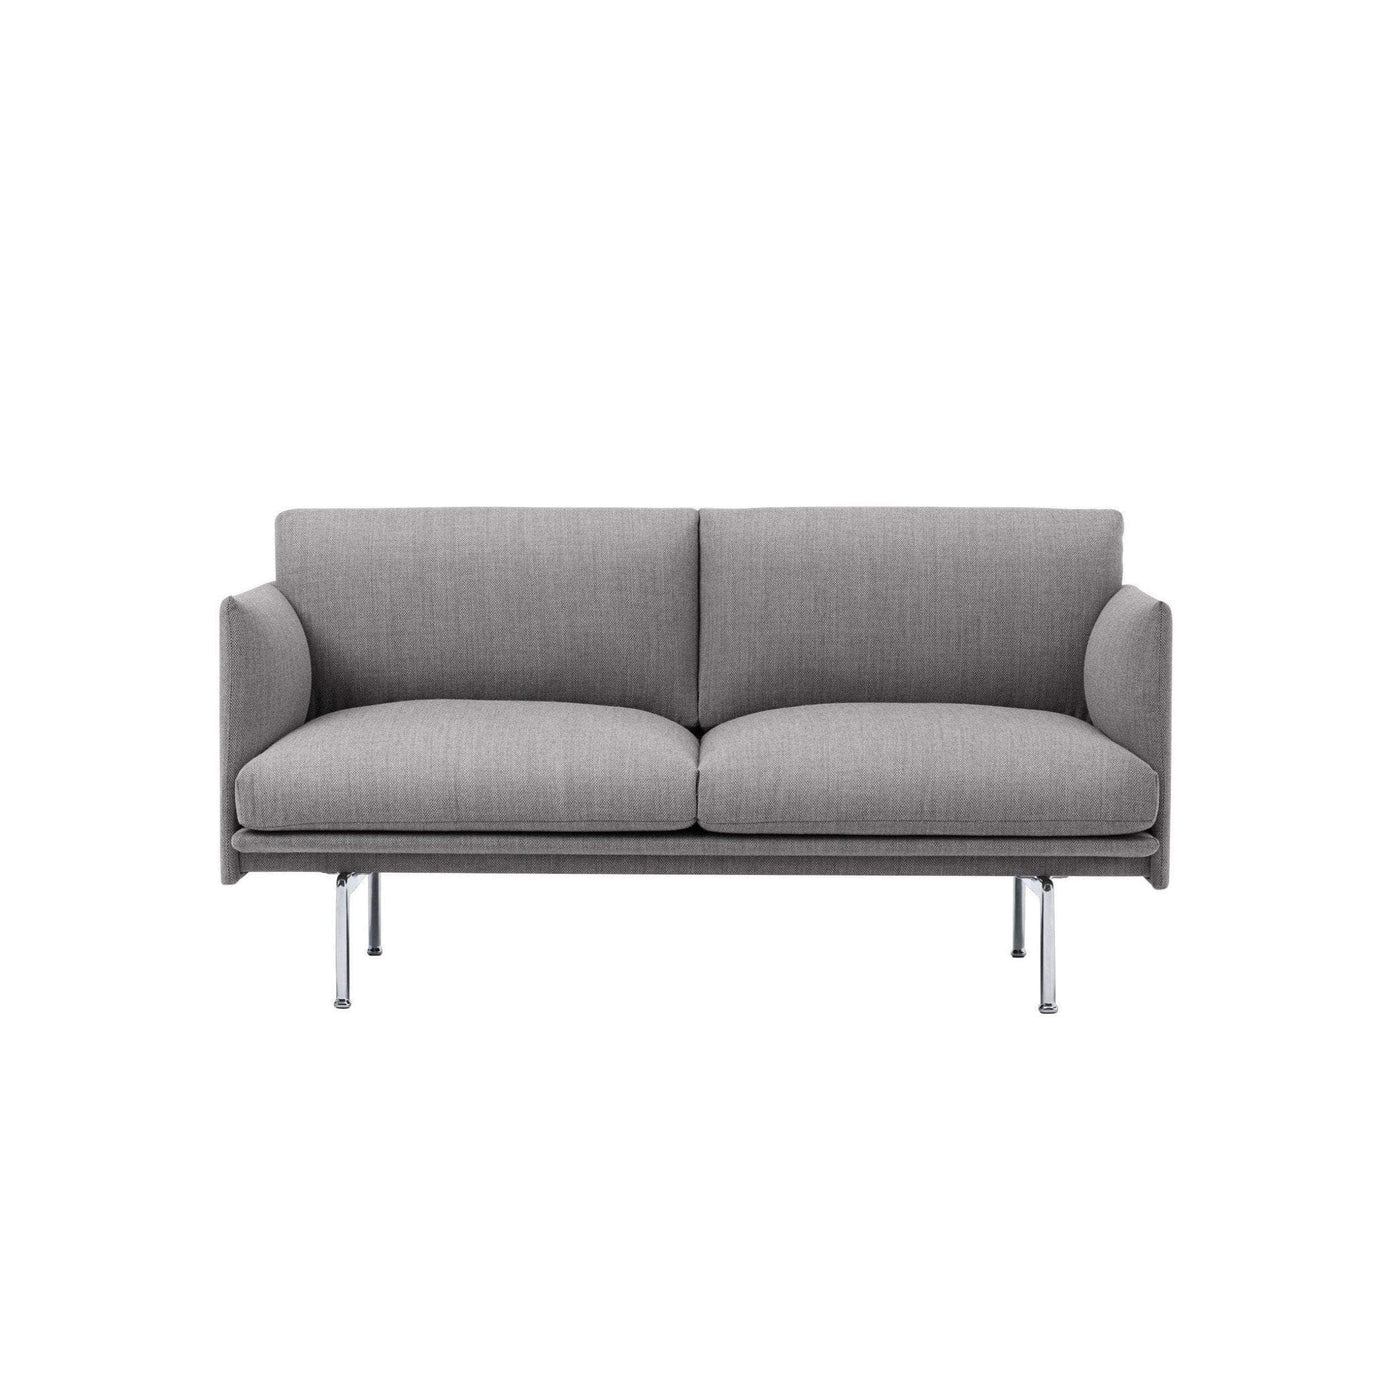 Muuto Outline Sofa Studio in fiord 151 grey fabric and polished aluminium legs. Made to order from someday designs. #colour_fiord-151